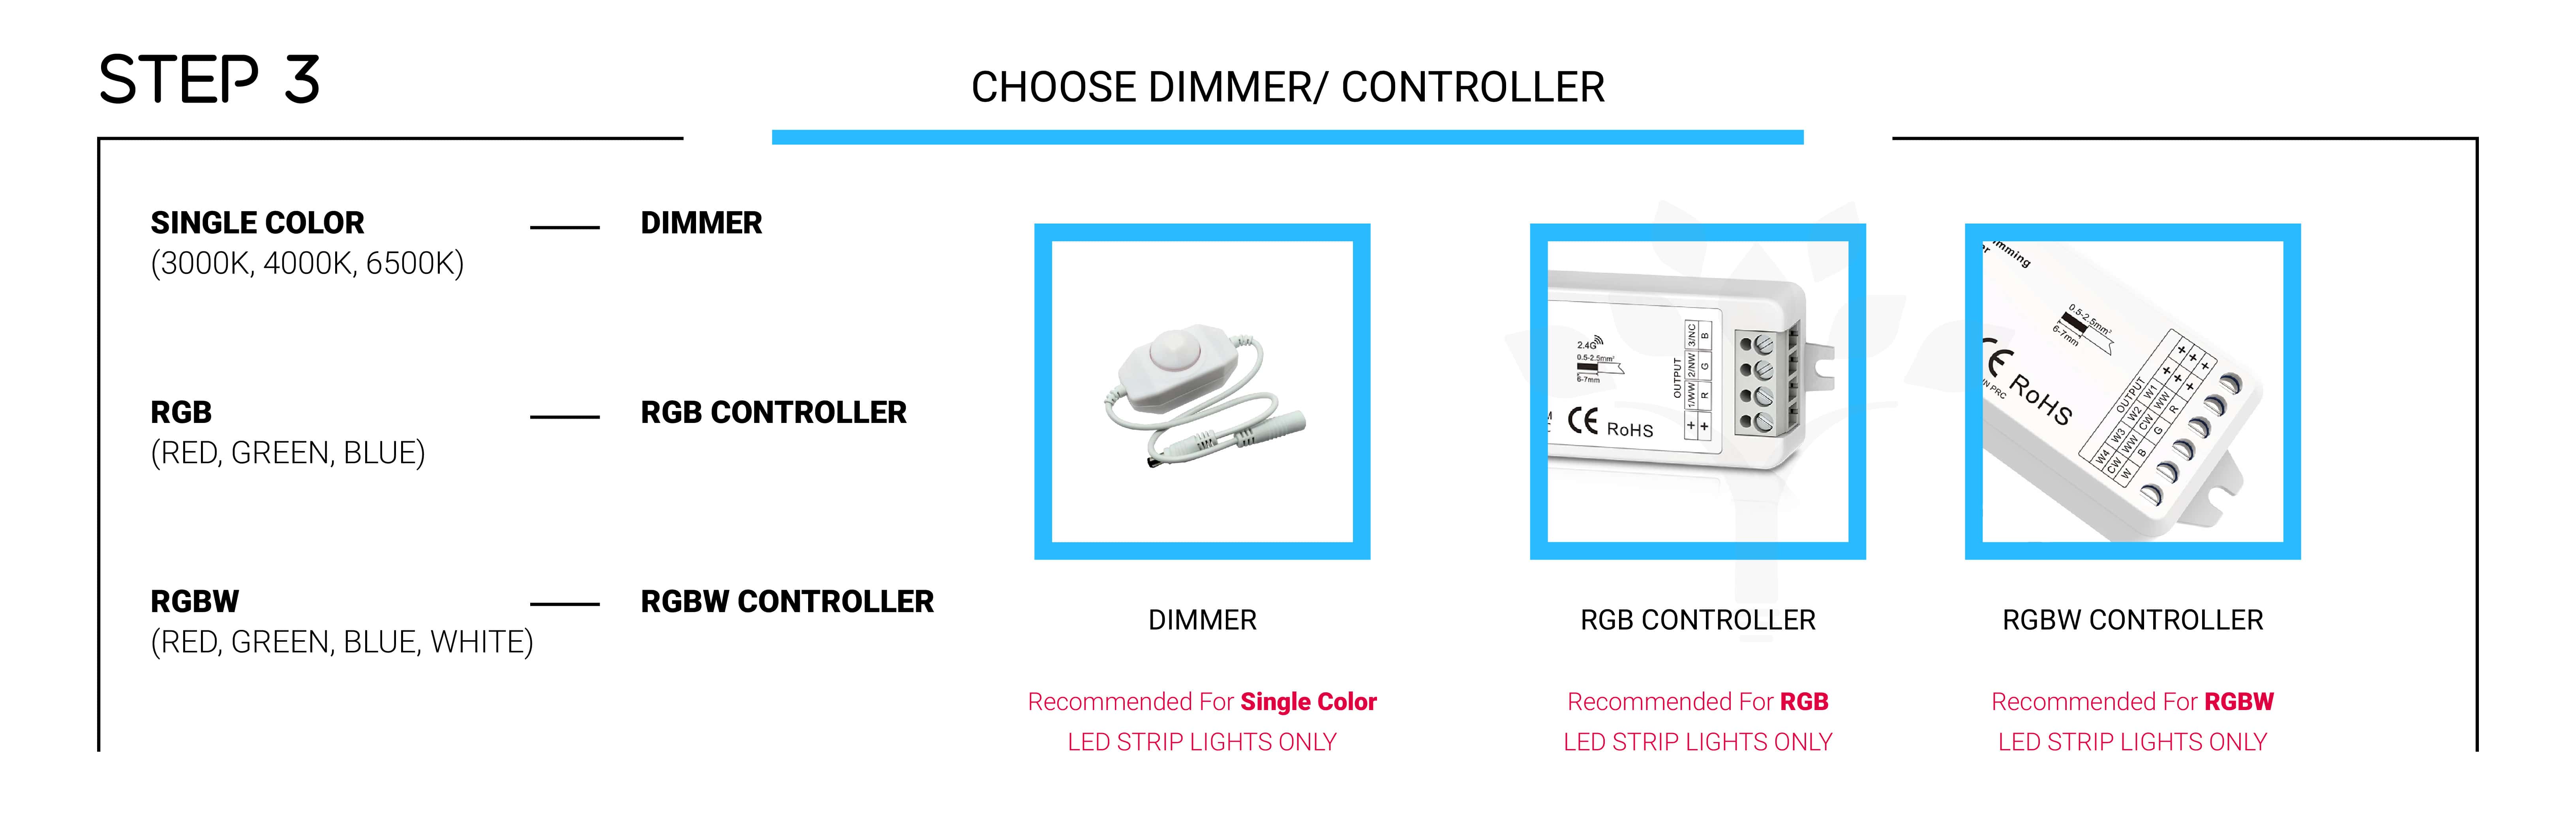 LED Strip Light Dimmers & Controllers